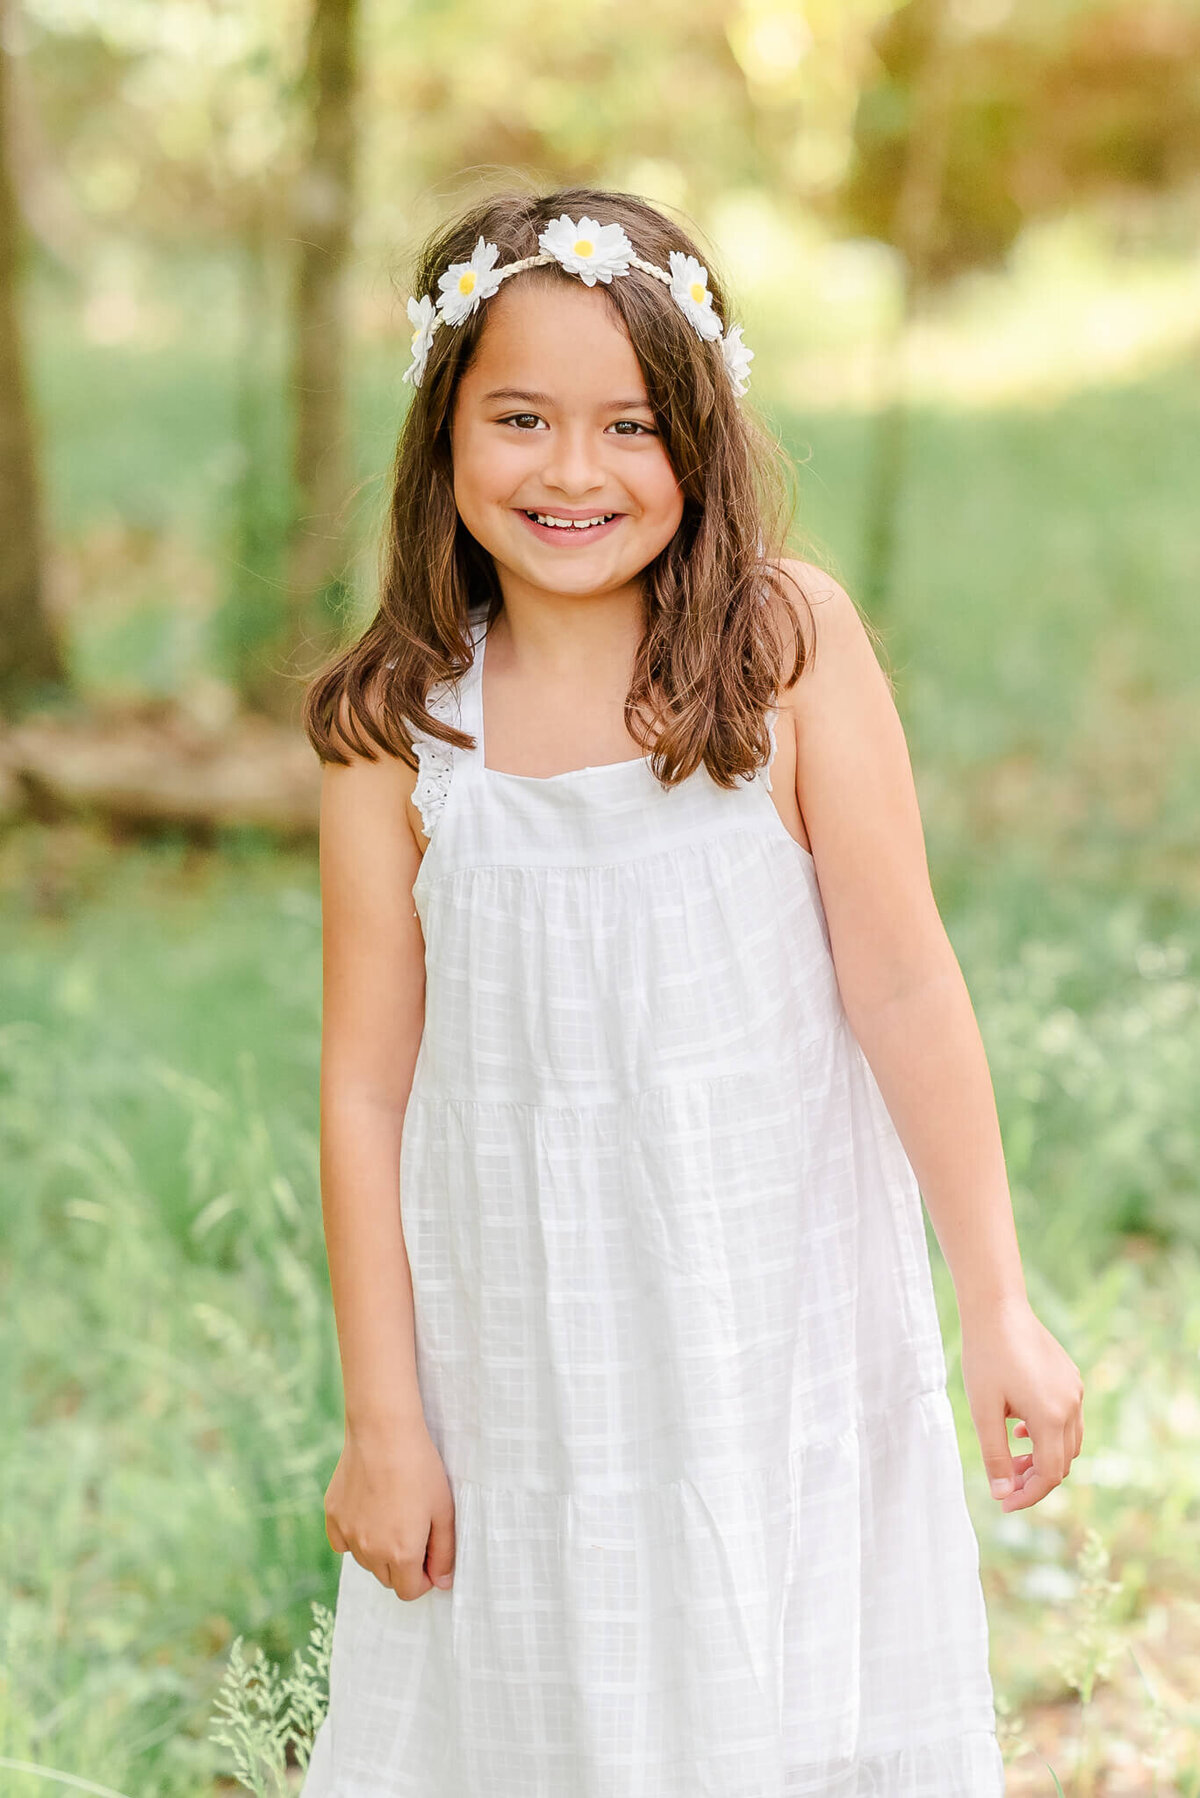 A young girl wearing a white dress and flower crown smiles for the camera at Northwest River Park near Moyock, NC.